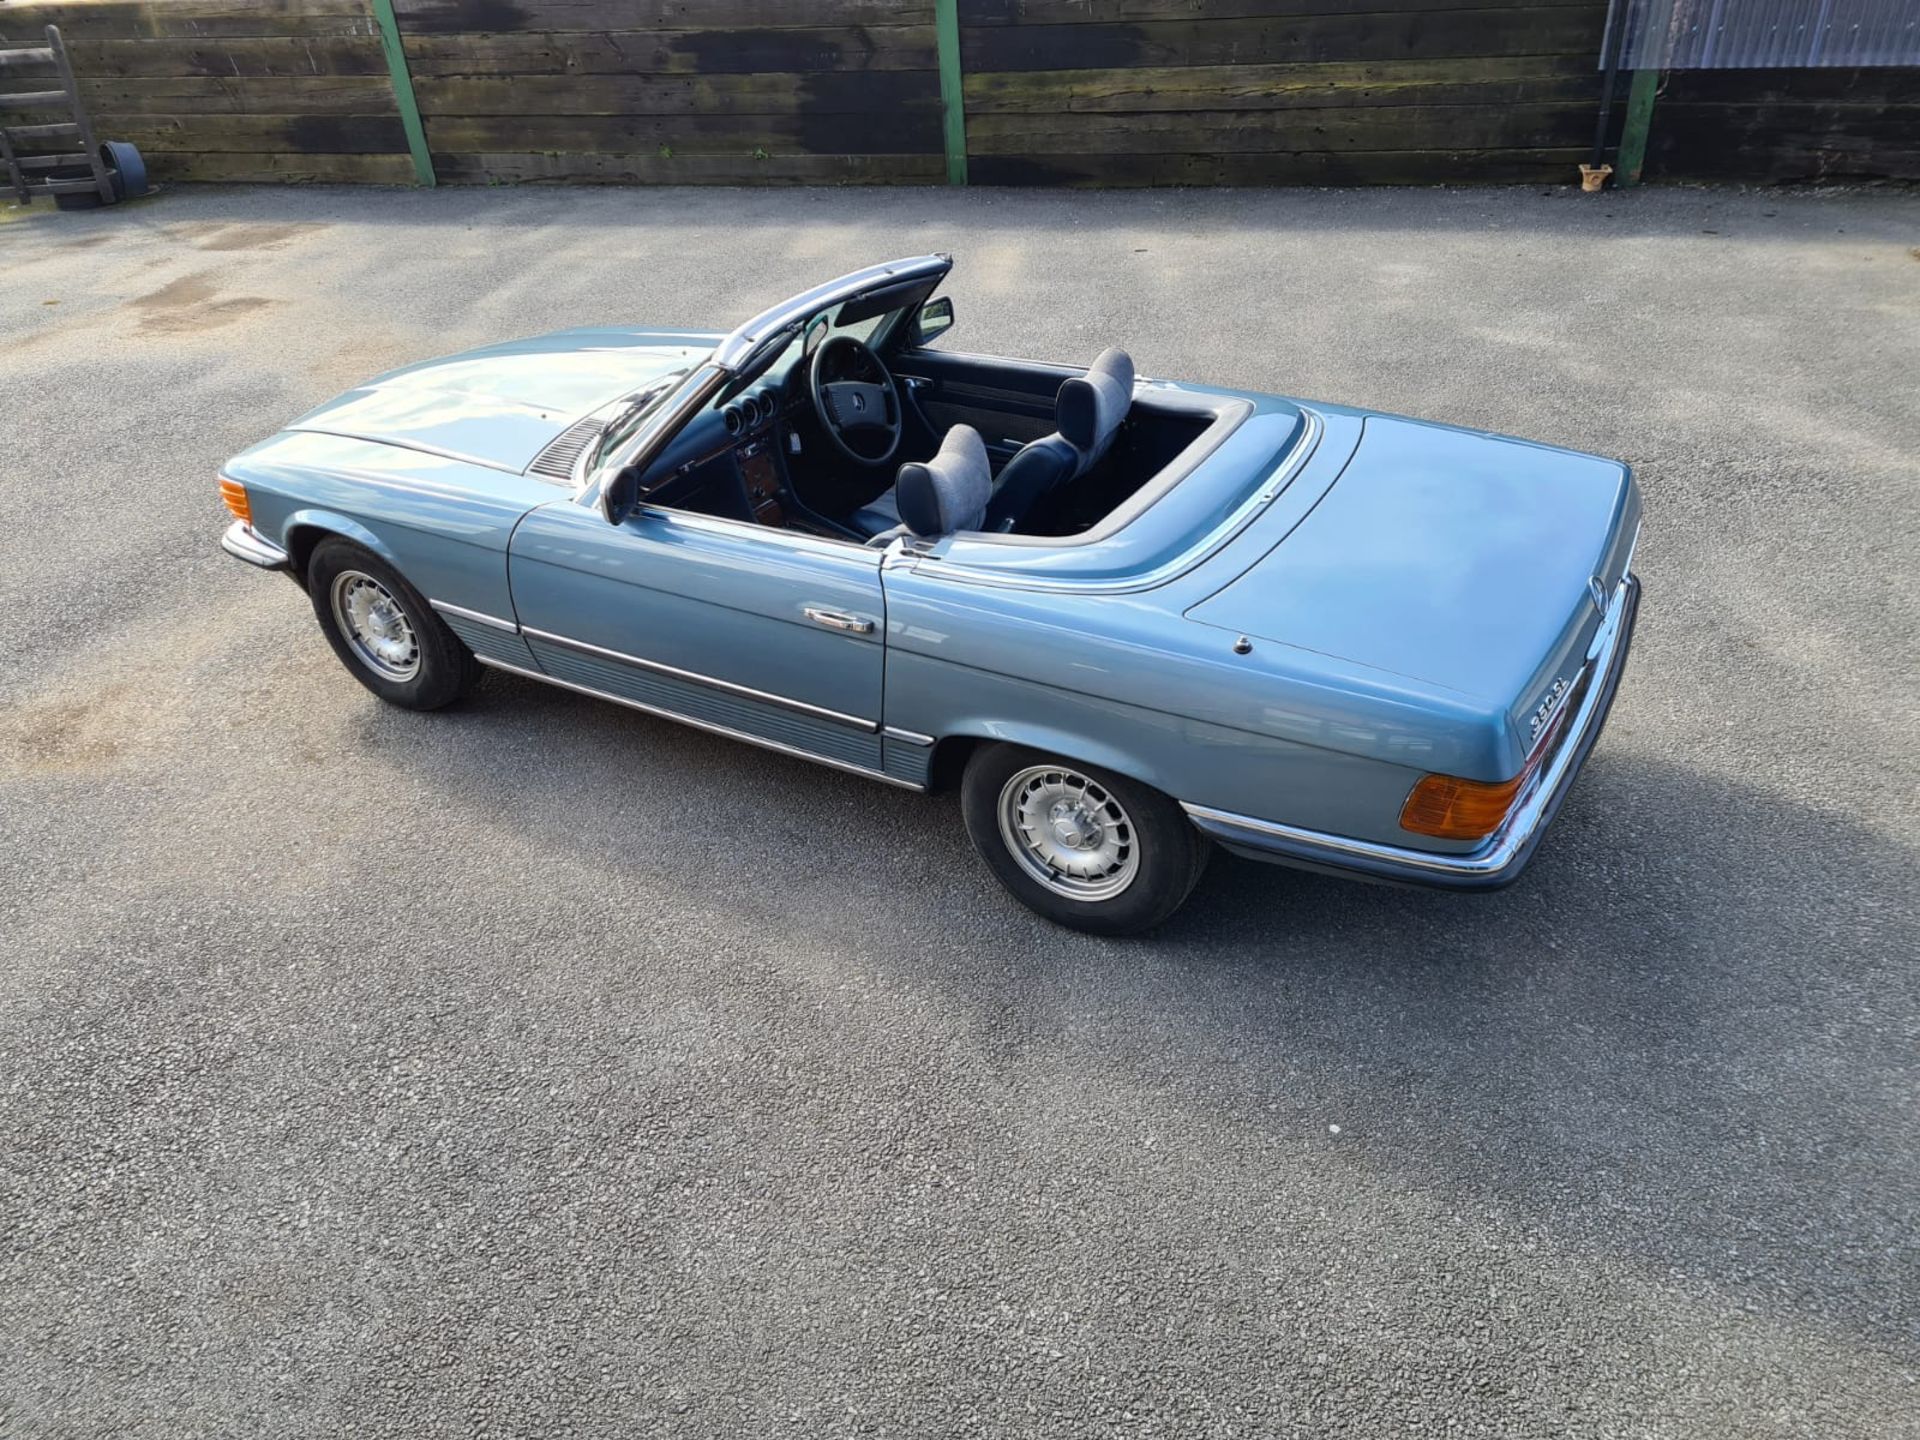 Stunning 1979 Mercedes Benz SL350 V8 With Factory Hardtop - Restored in 2018 - Image 16 of 22